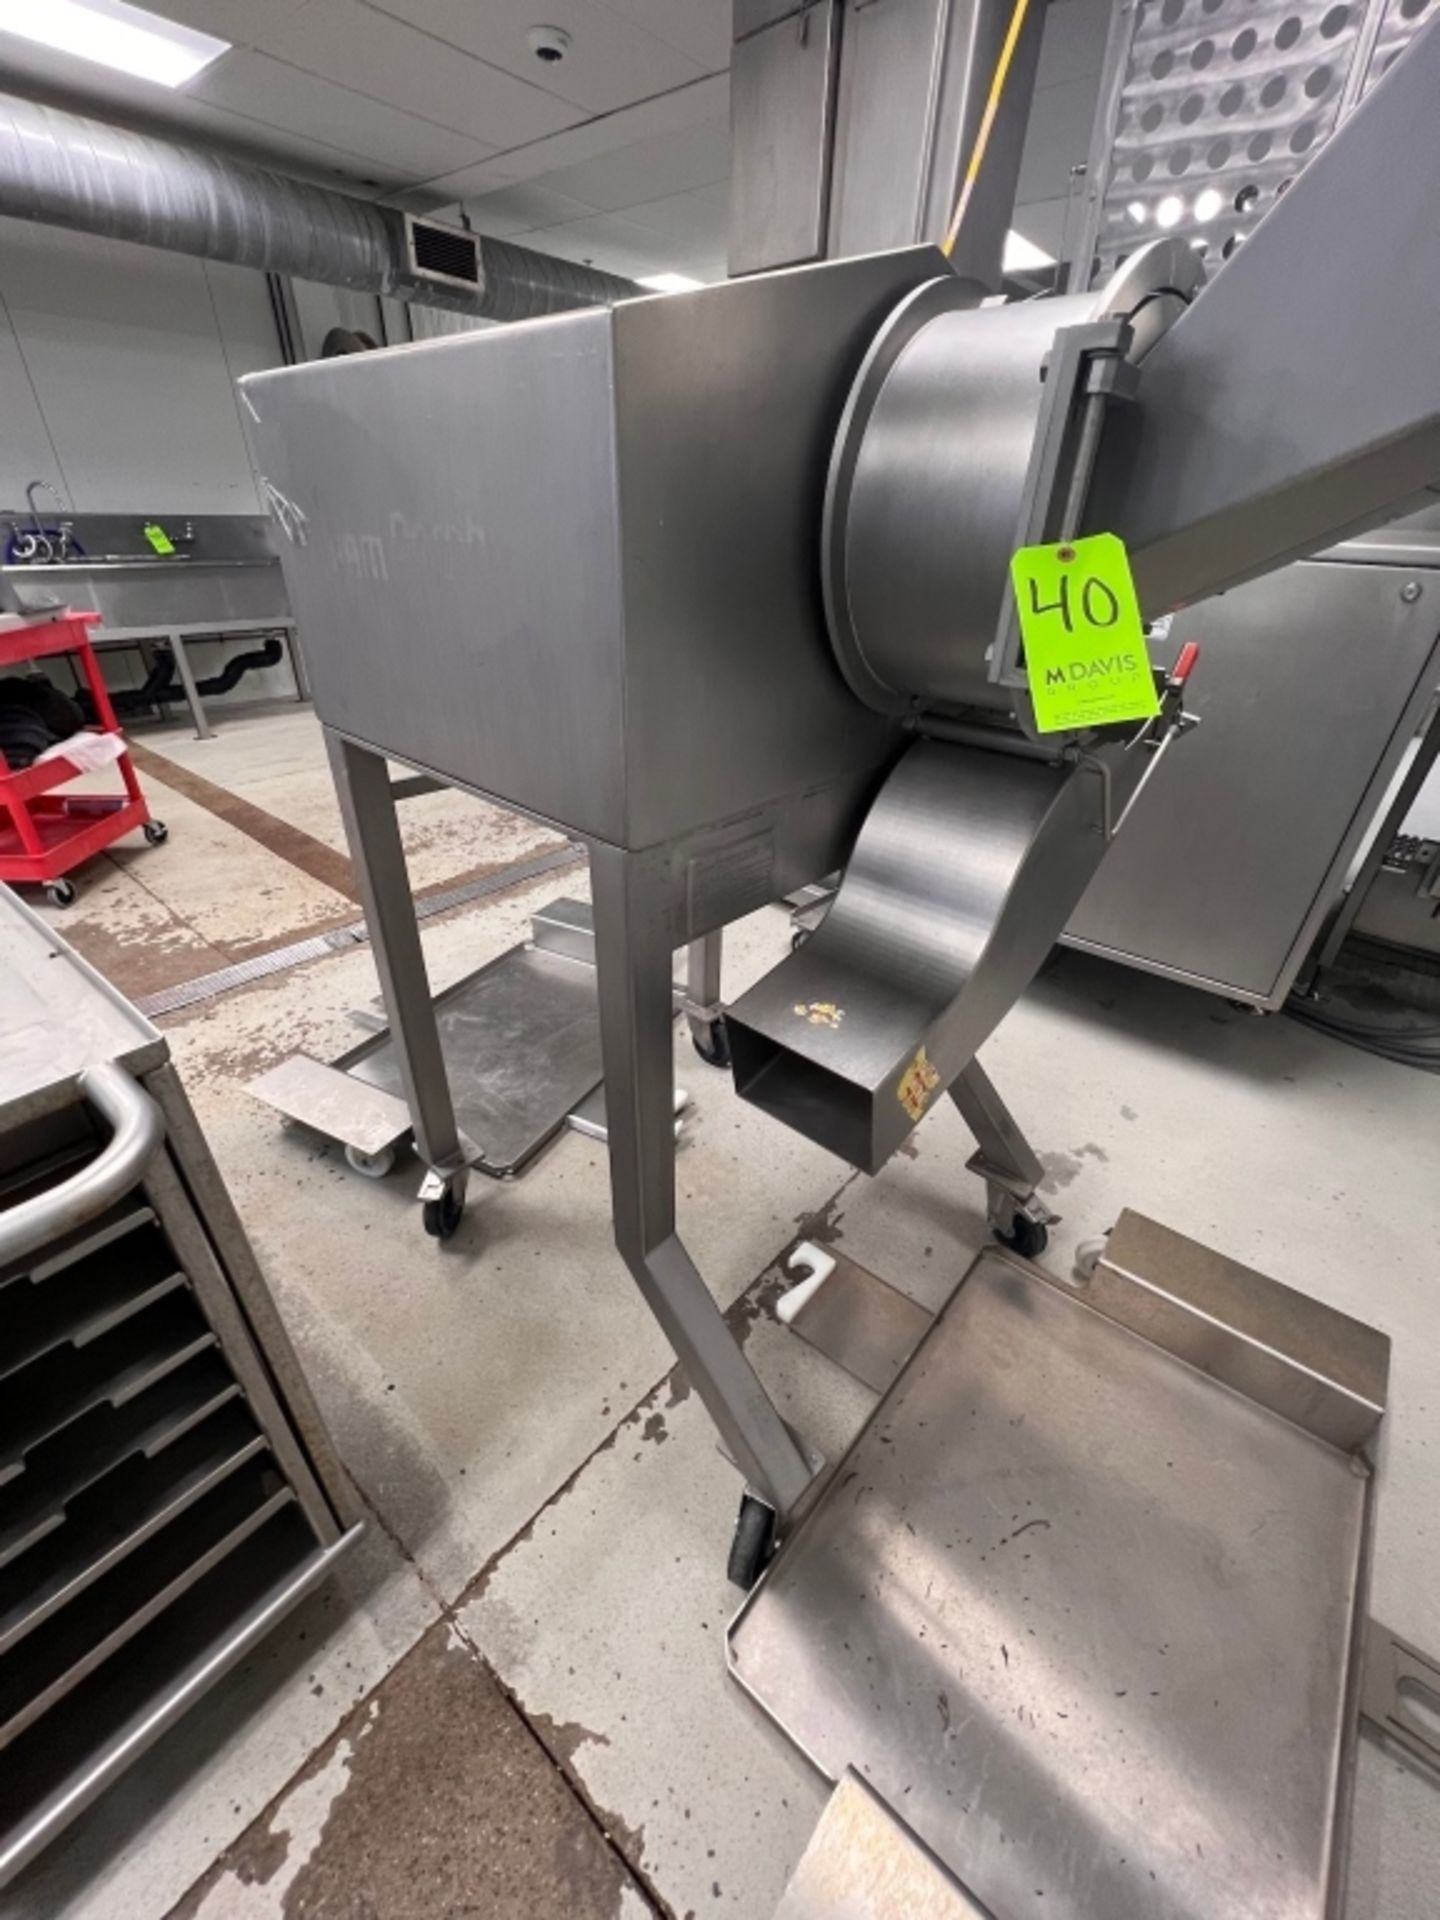 2014 FAM DORPHY S/S DICER, MODEL DORPHY, S/N 0015-5441, 2-HP, 230/60, 3 PHASE, INCLUDES (2) BOWL - Image 13 of 16